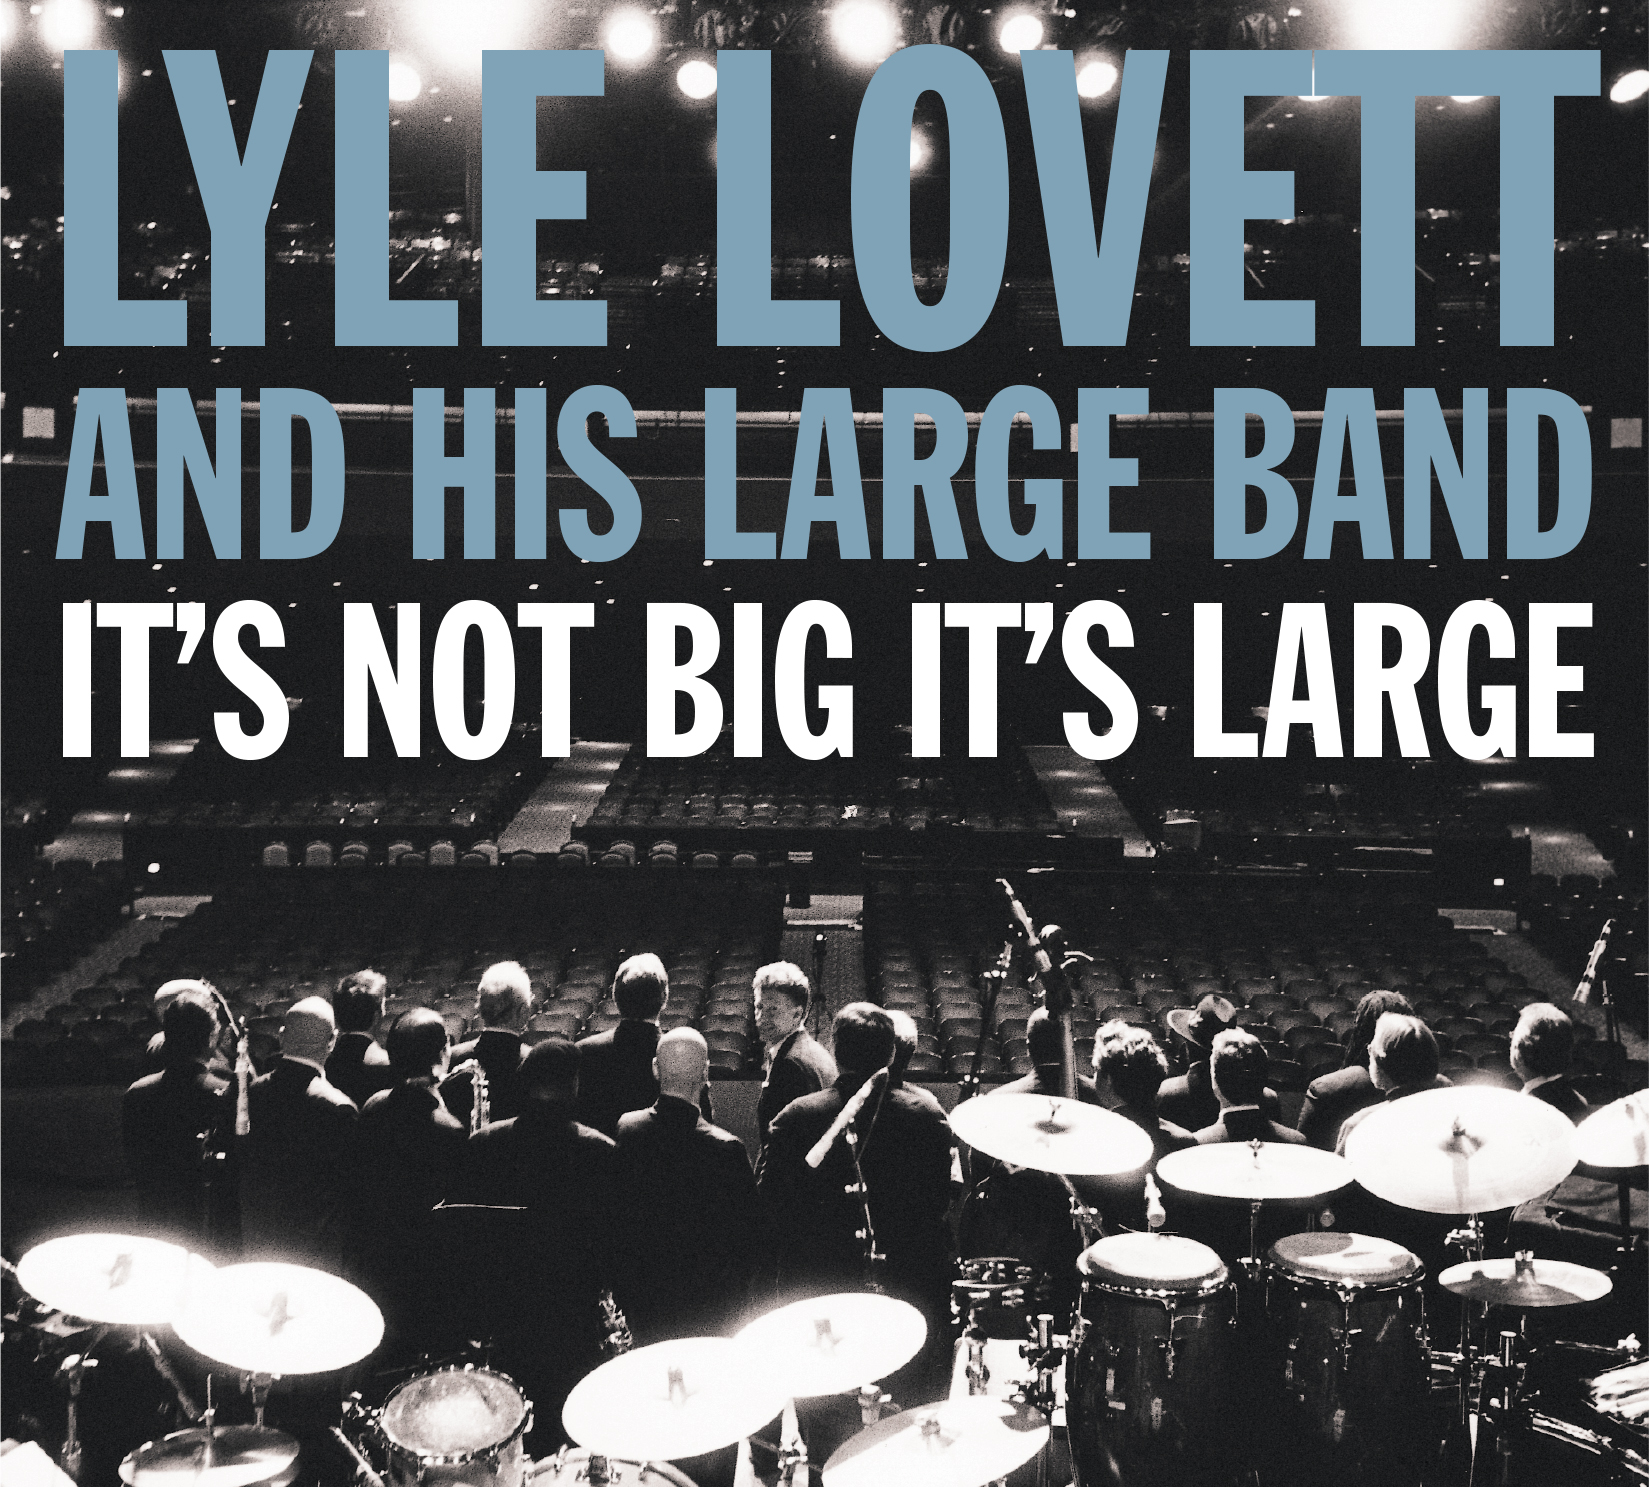 2007: Lyle Lovett and his Large Band, It's Not Big, It's Large